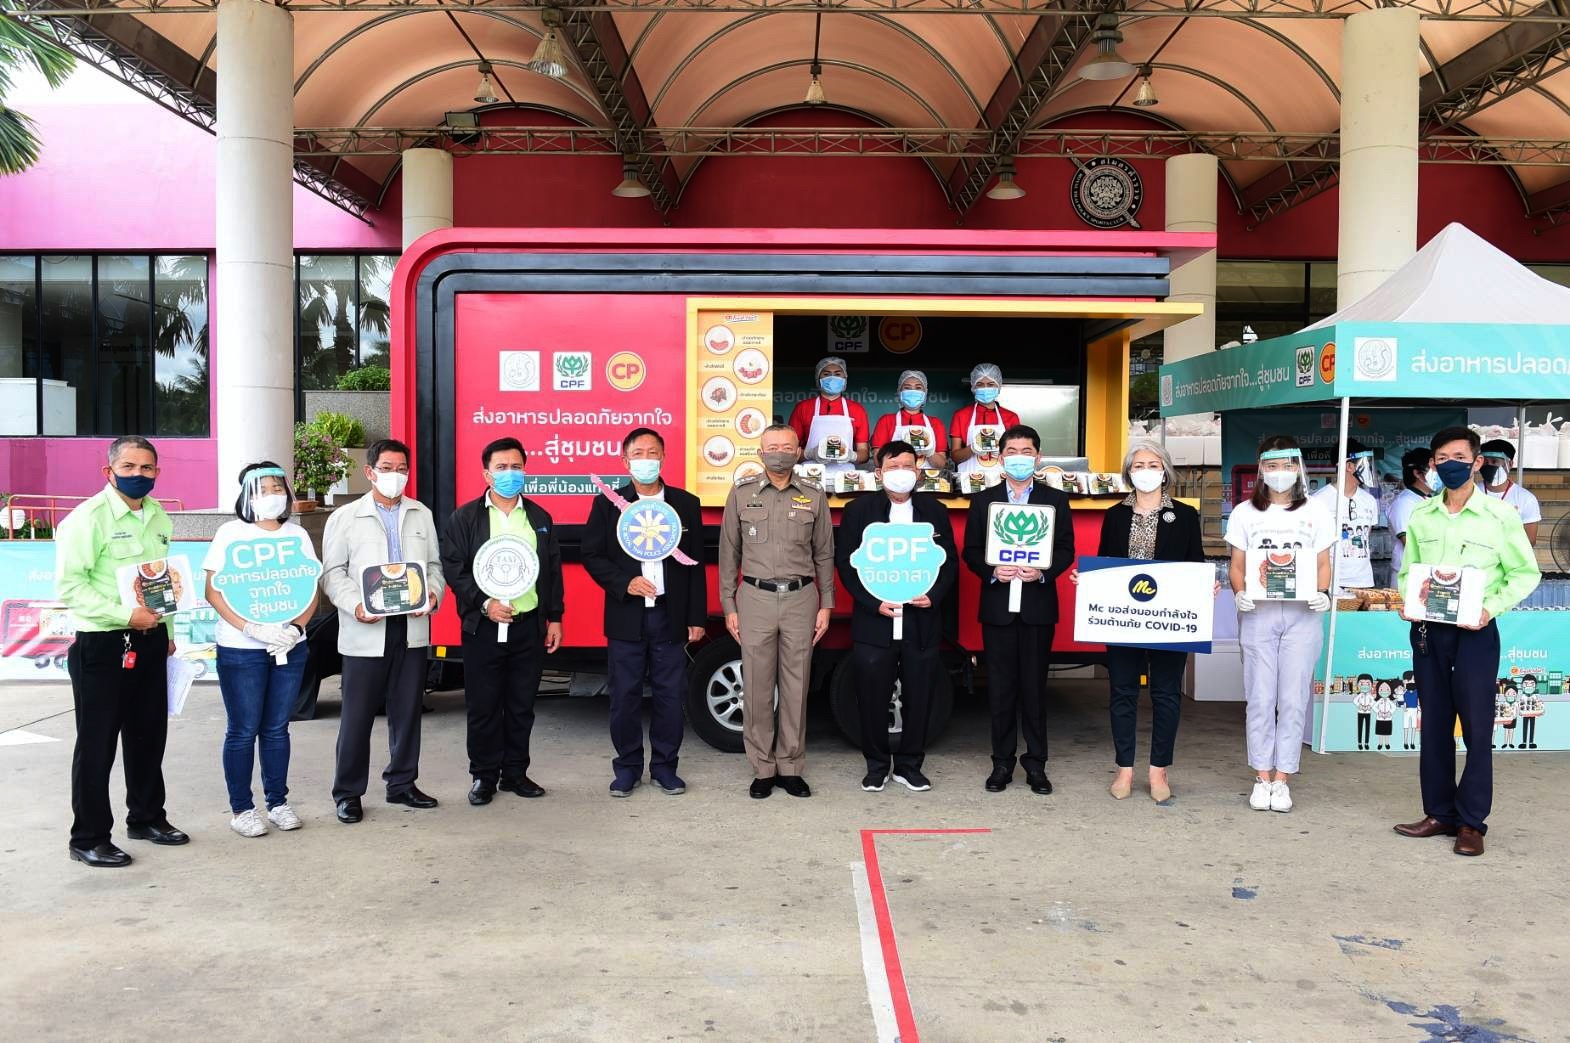 CPF and the Royal Thai Police Association jointly giveaway free meals to Taxi drivers